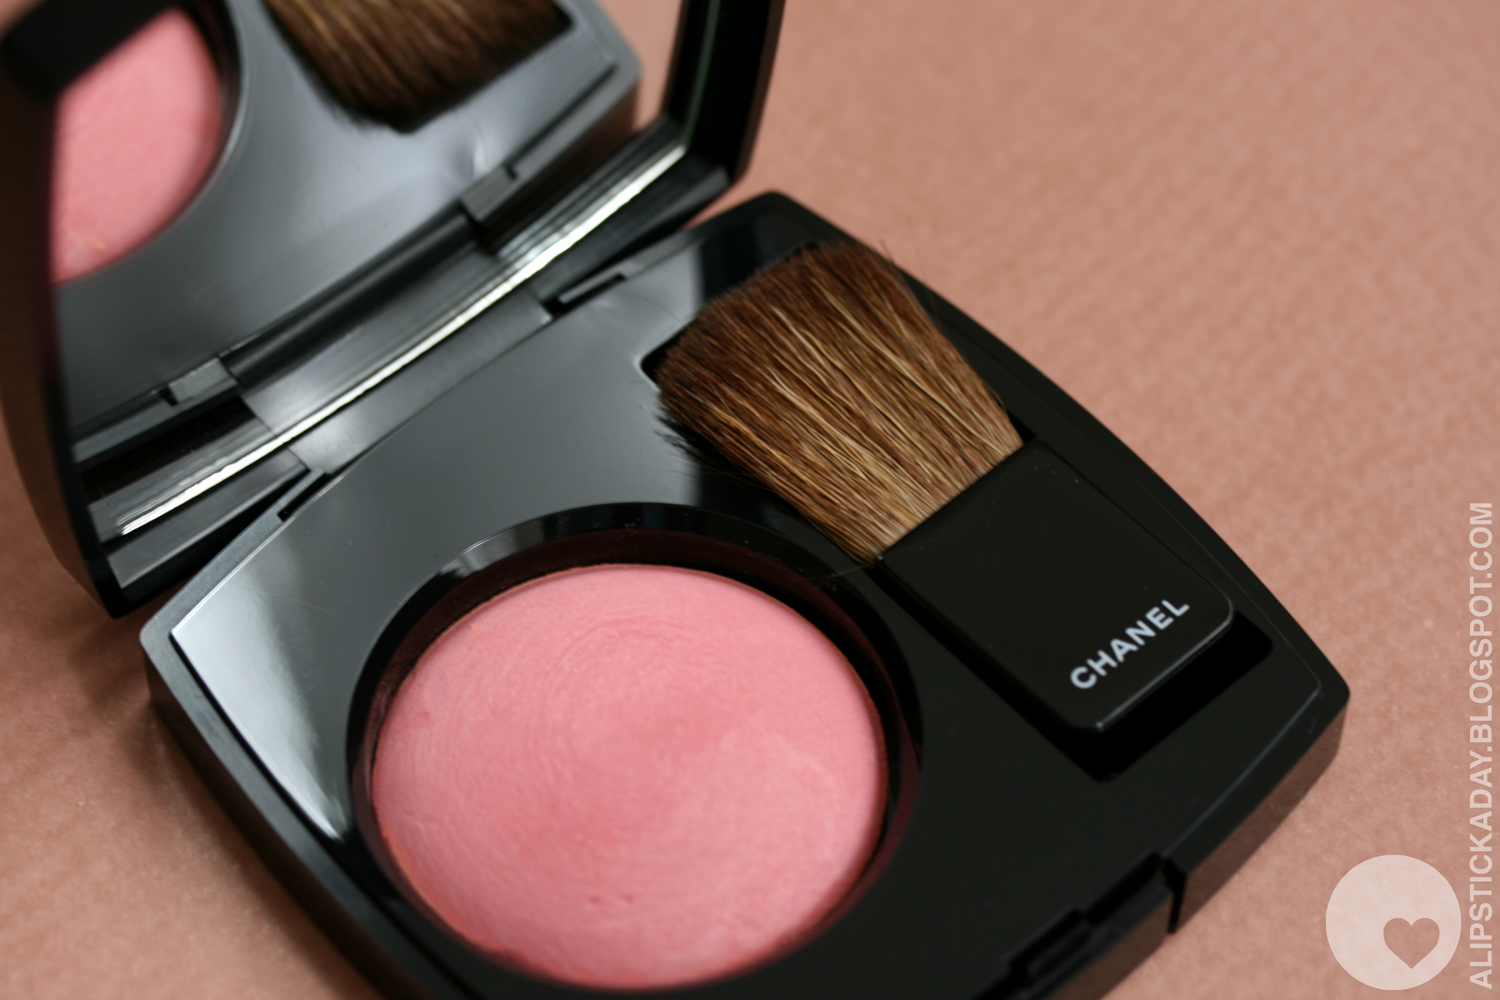 CHANEL – #72 Rose Initiale Joues Contraste Powder Blush for Fall